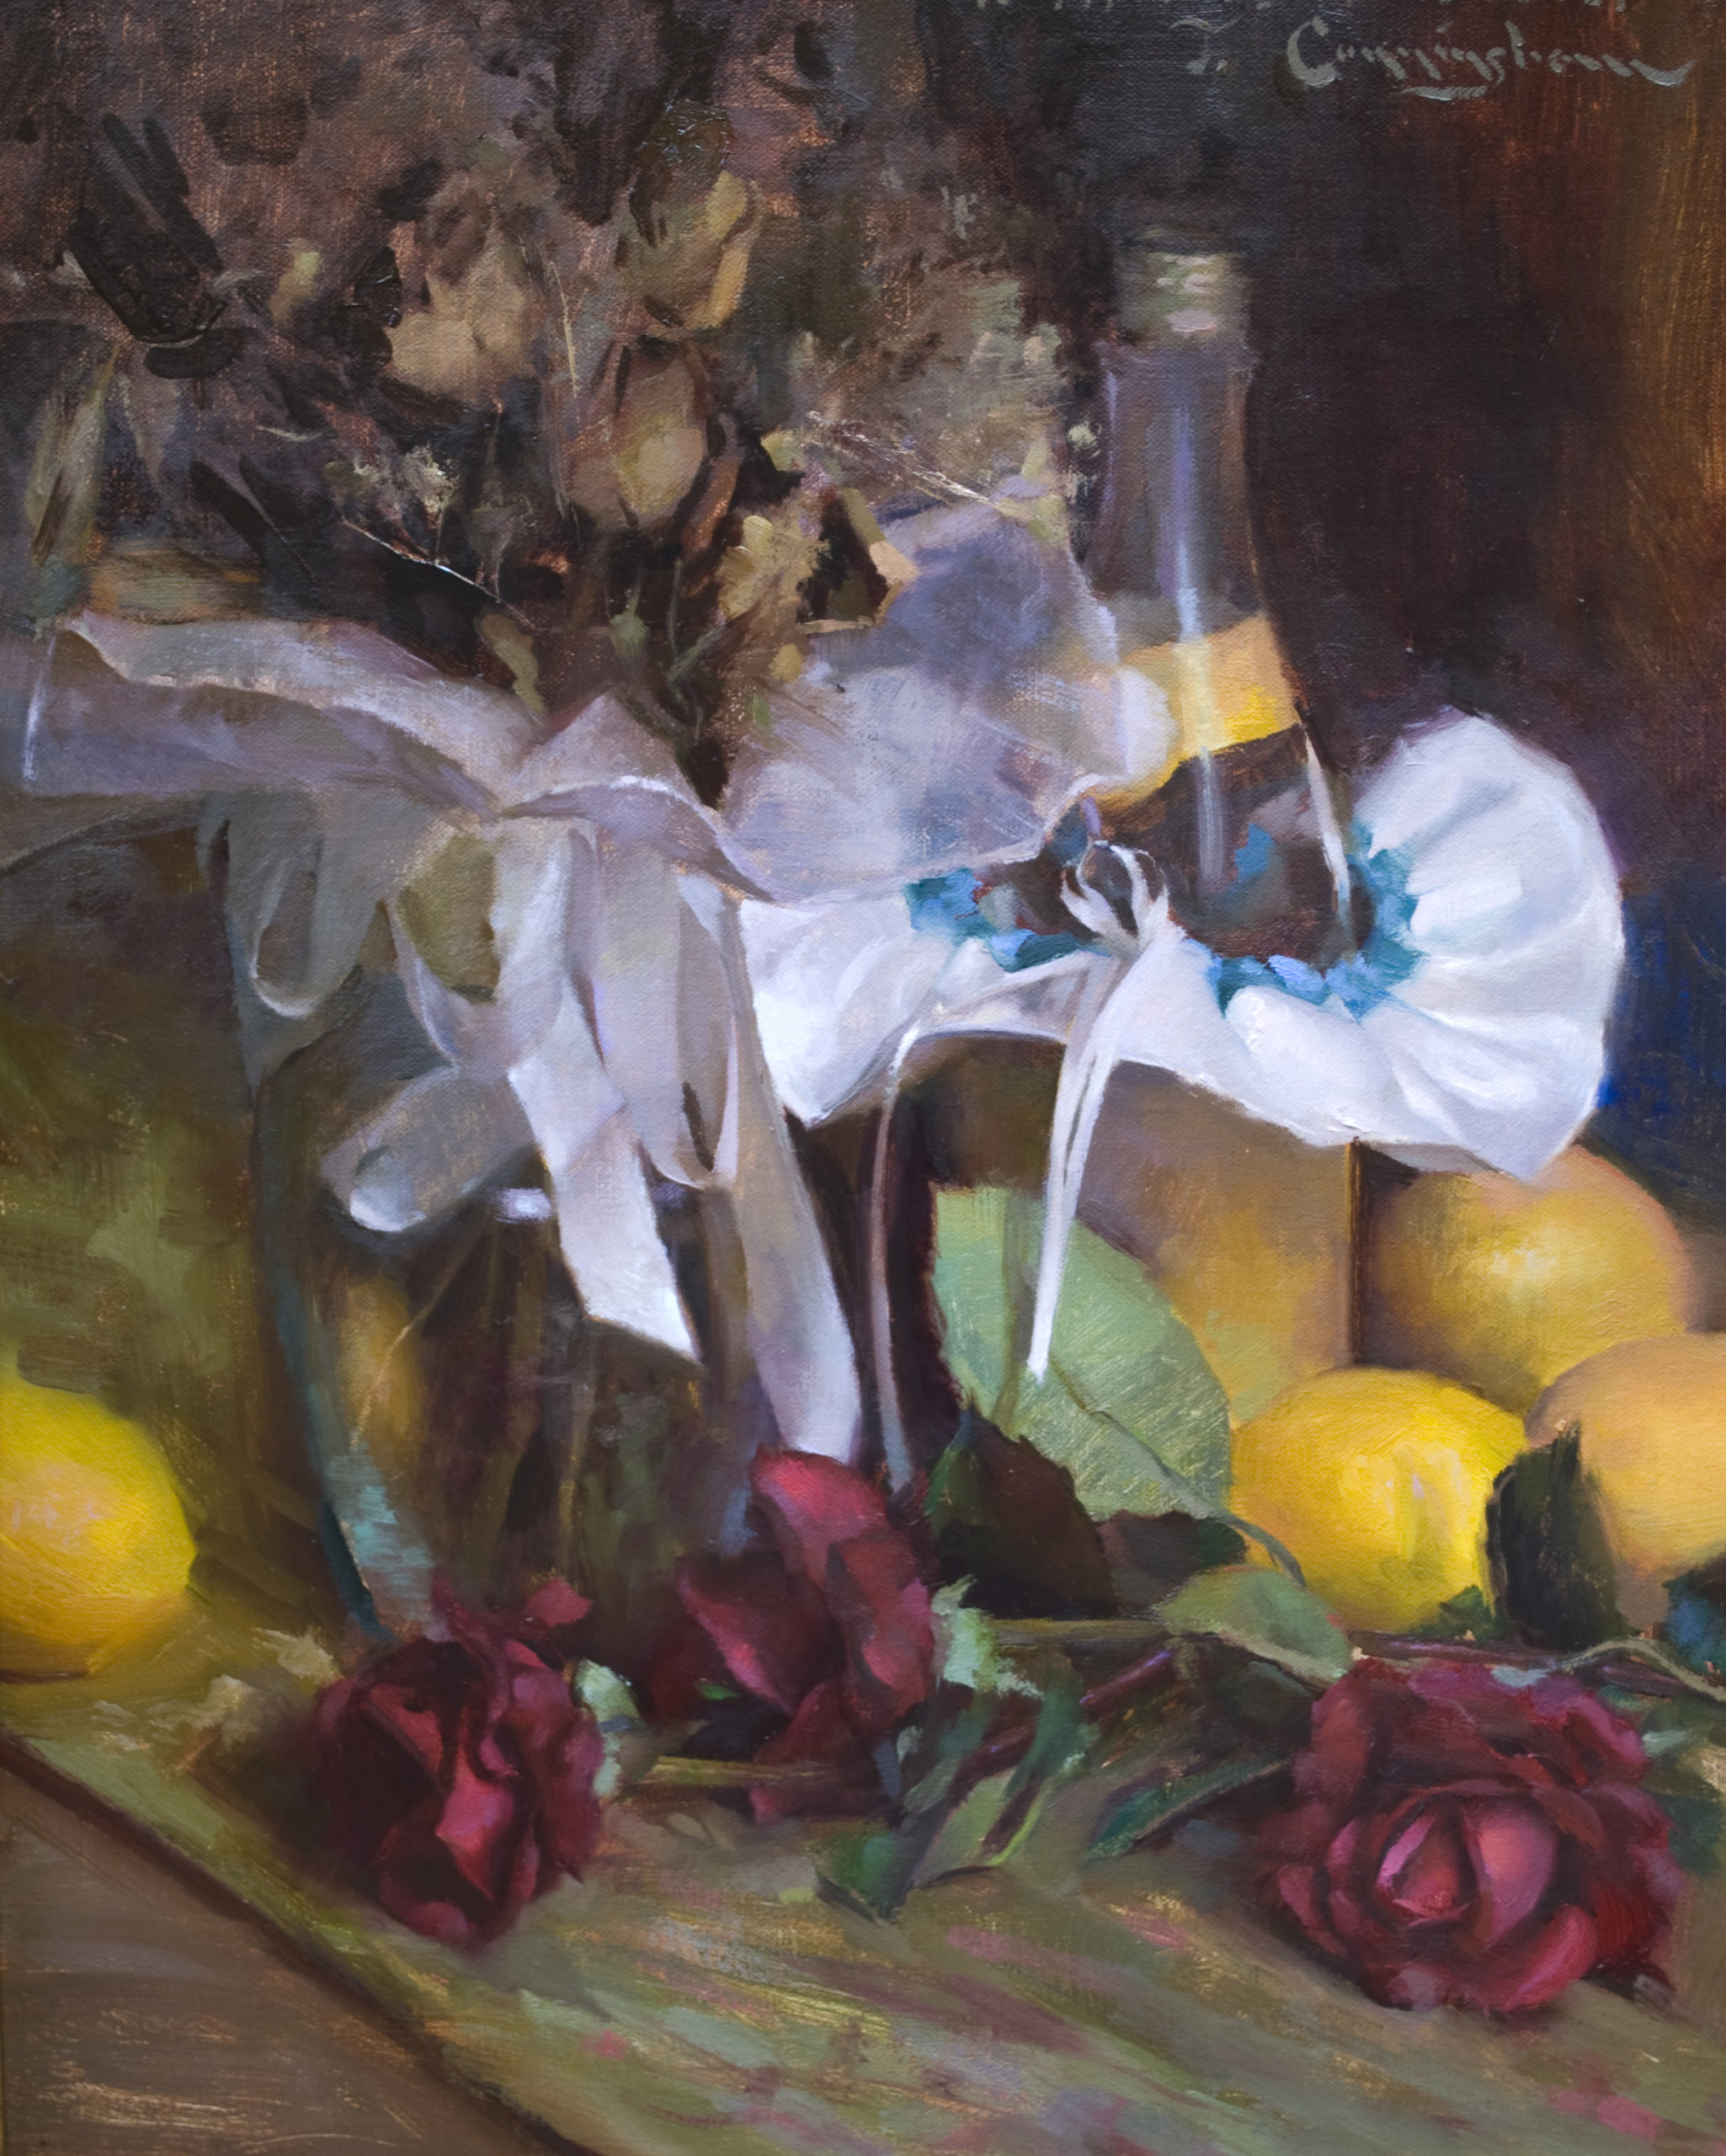 Still Life painting - TJ Cunningham, "4th valentines," 16 x 20 inches, Oil on linen